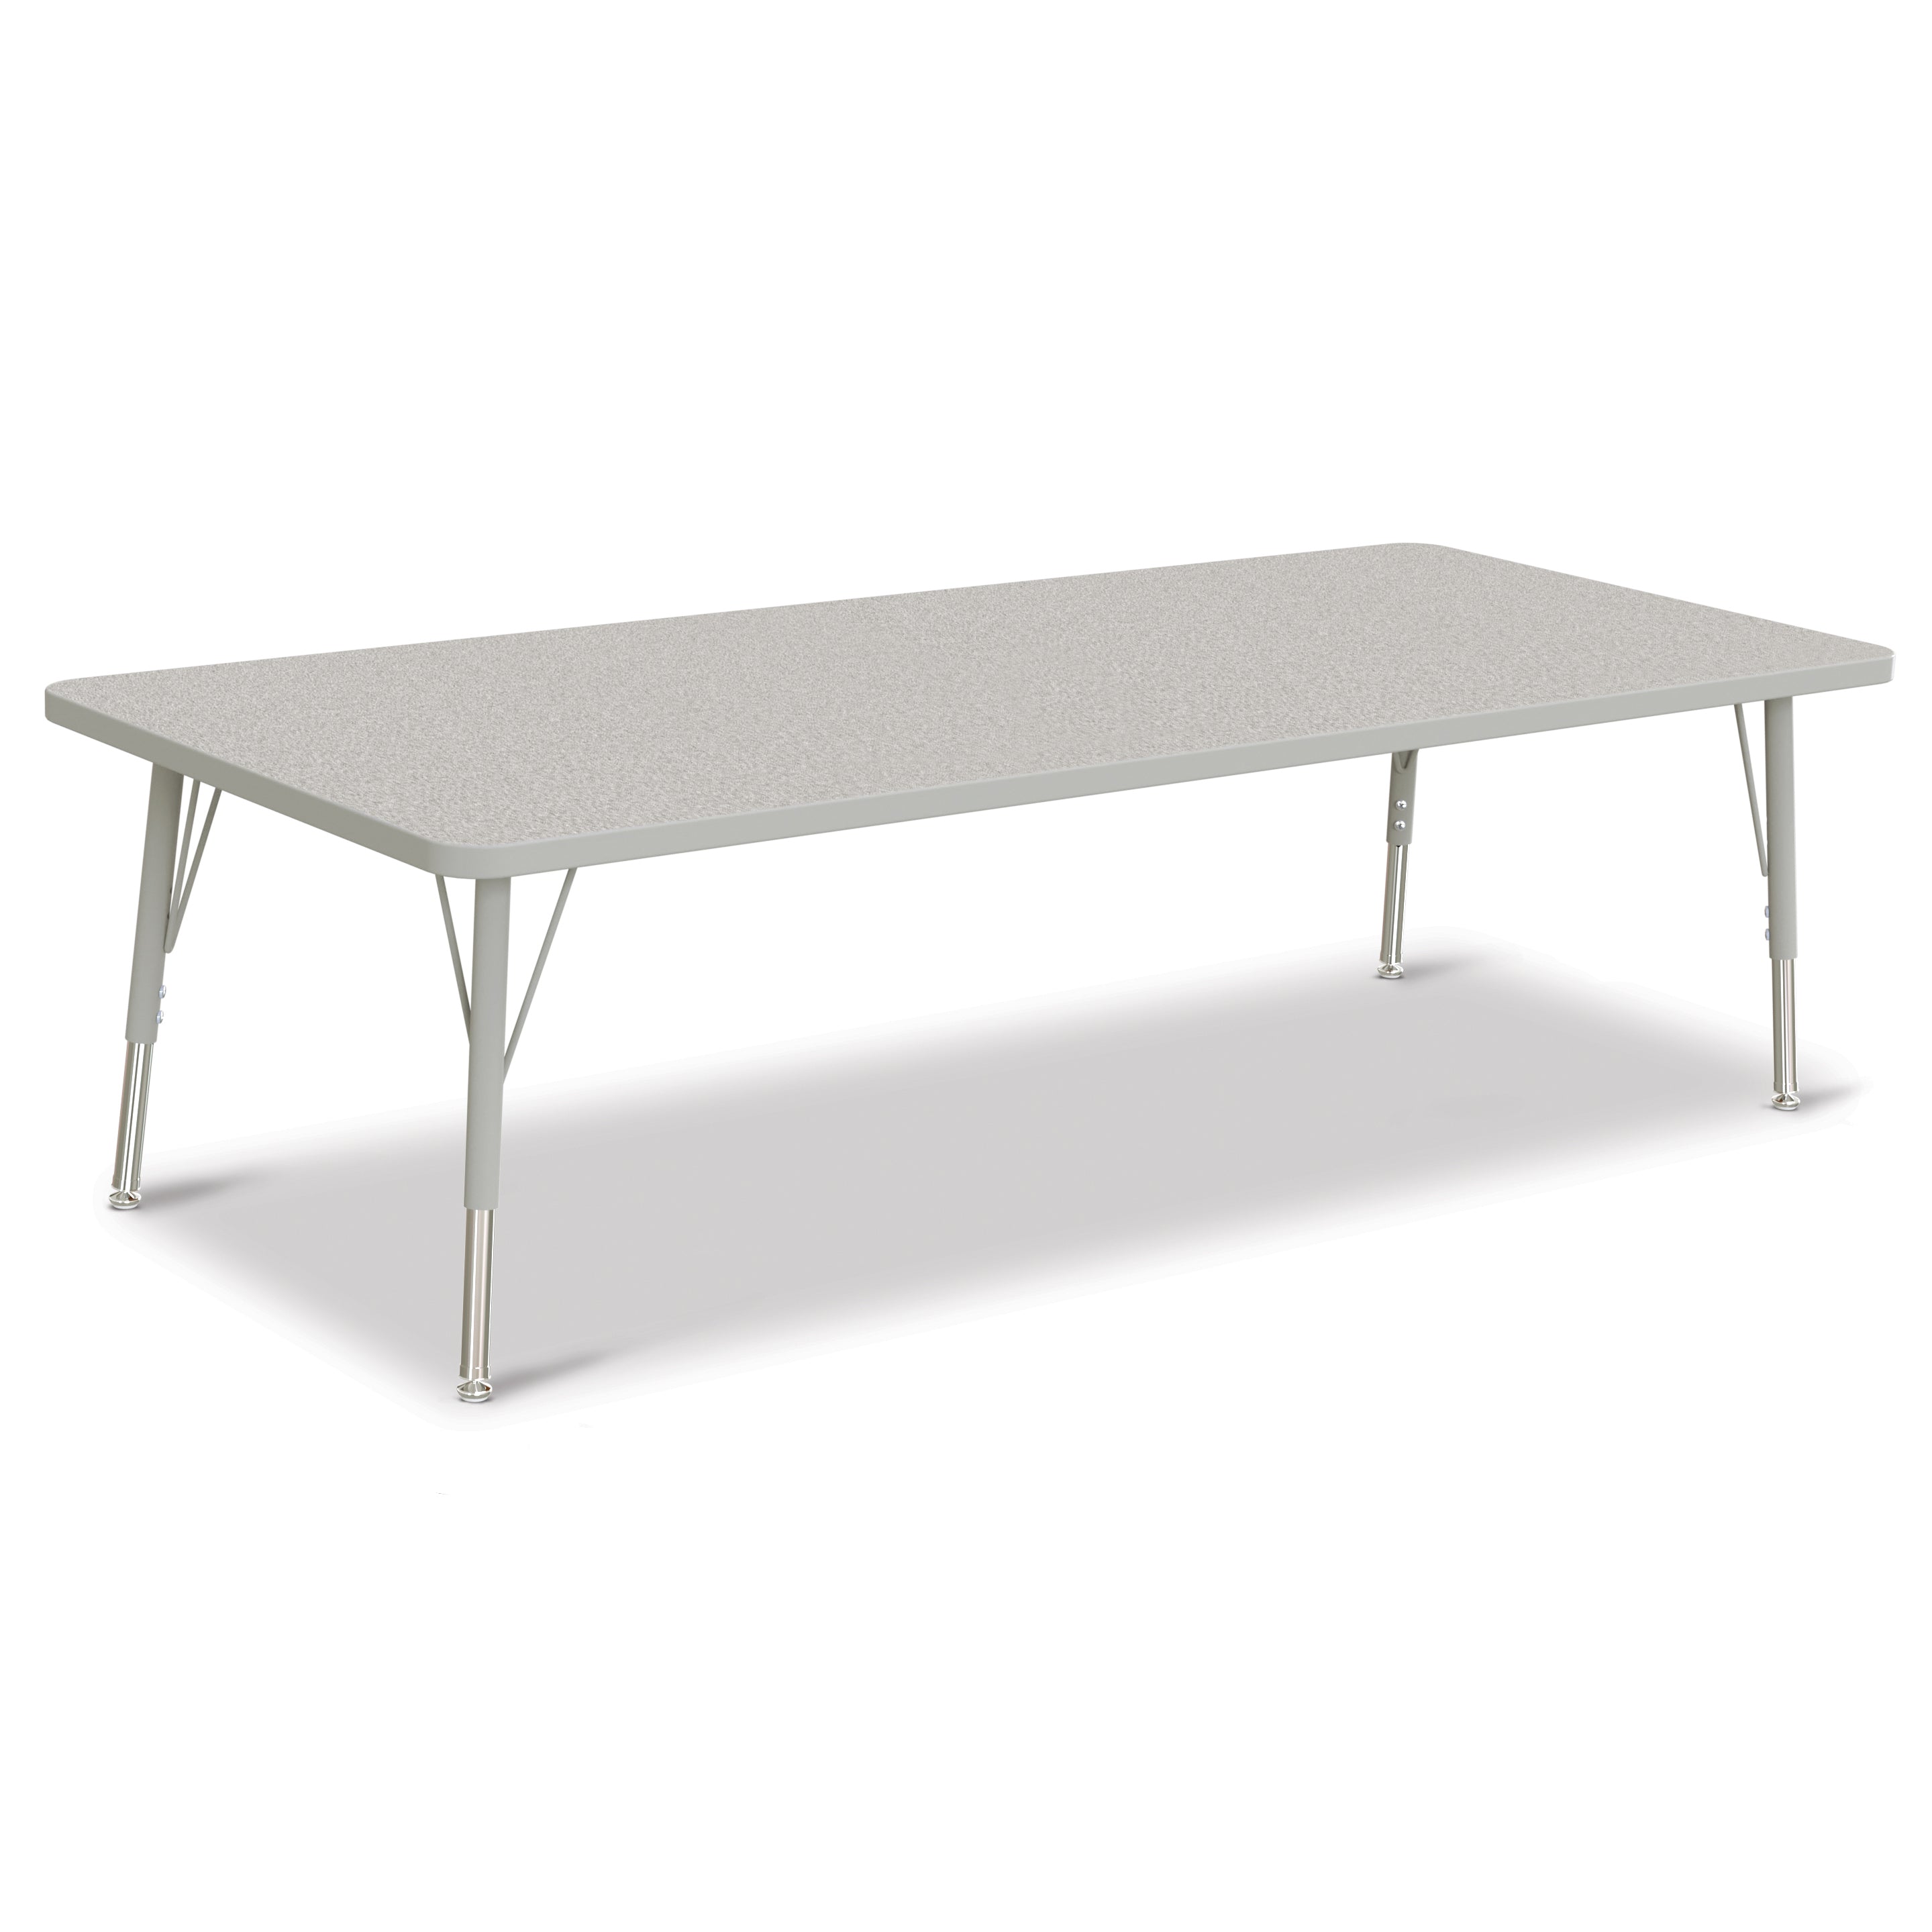 6413JCE000, Berries Rectangle Activity Table - 30" X 72", E-height - Freckled Gray/Gray/Gray